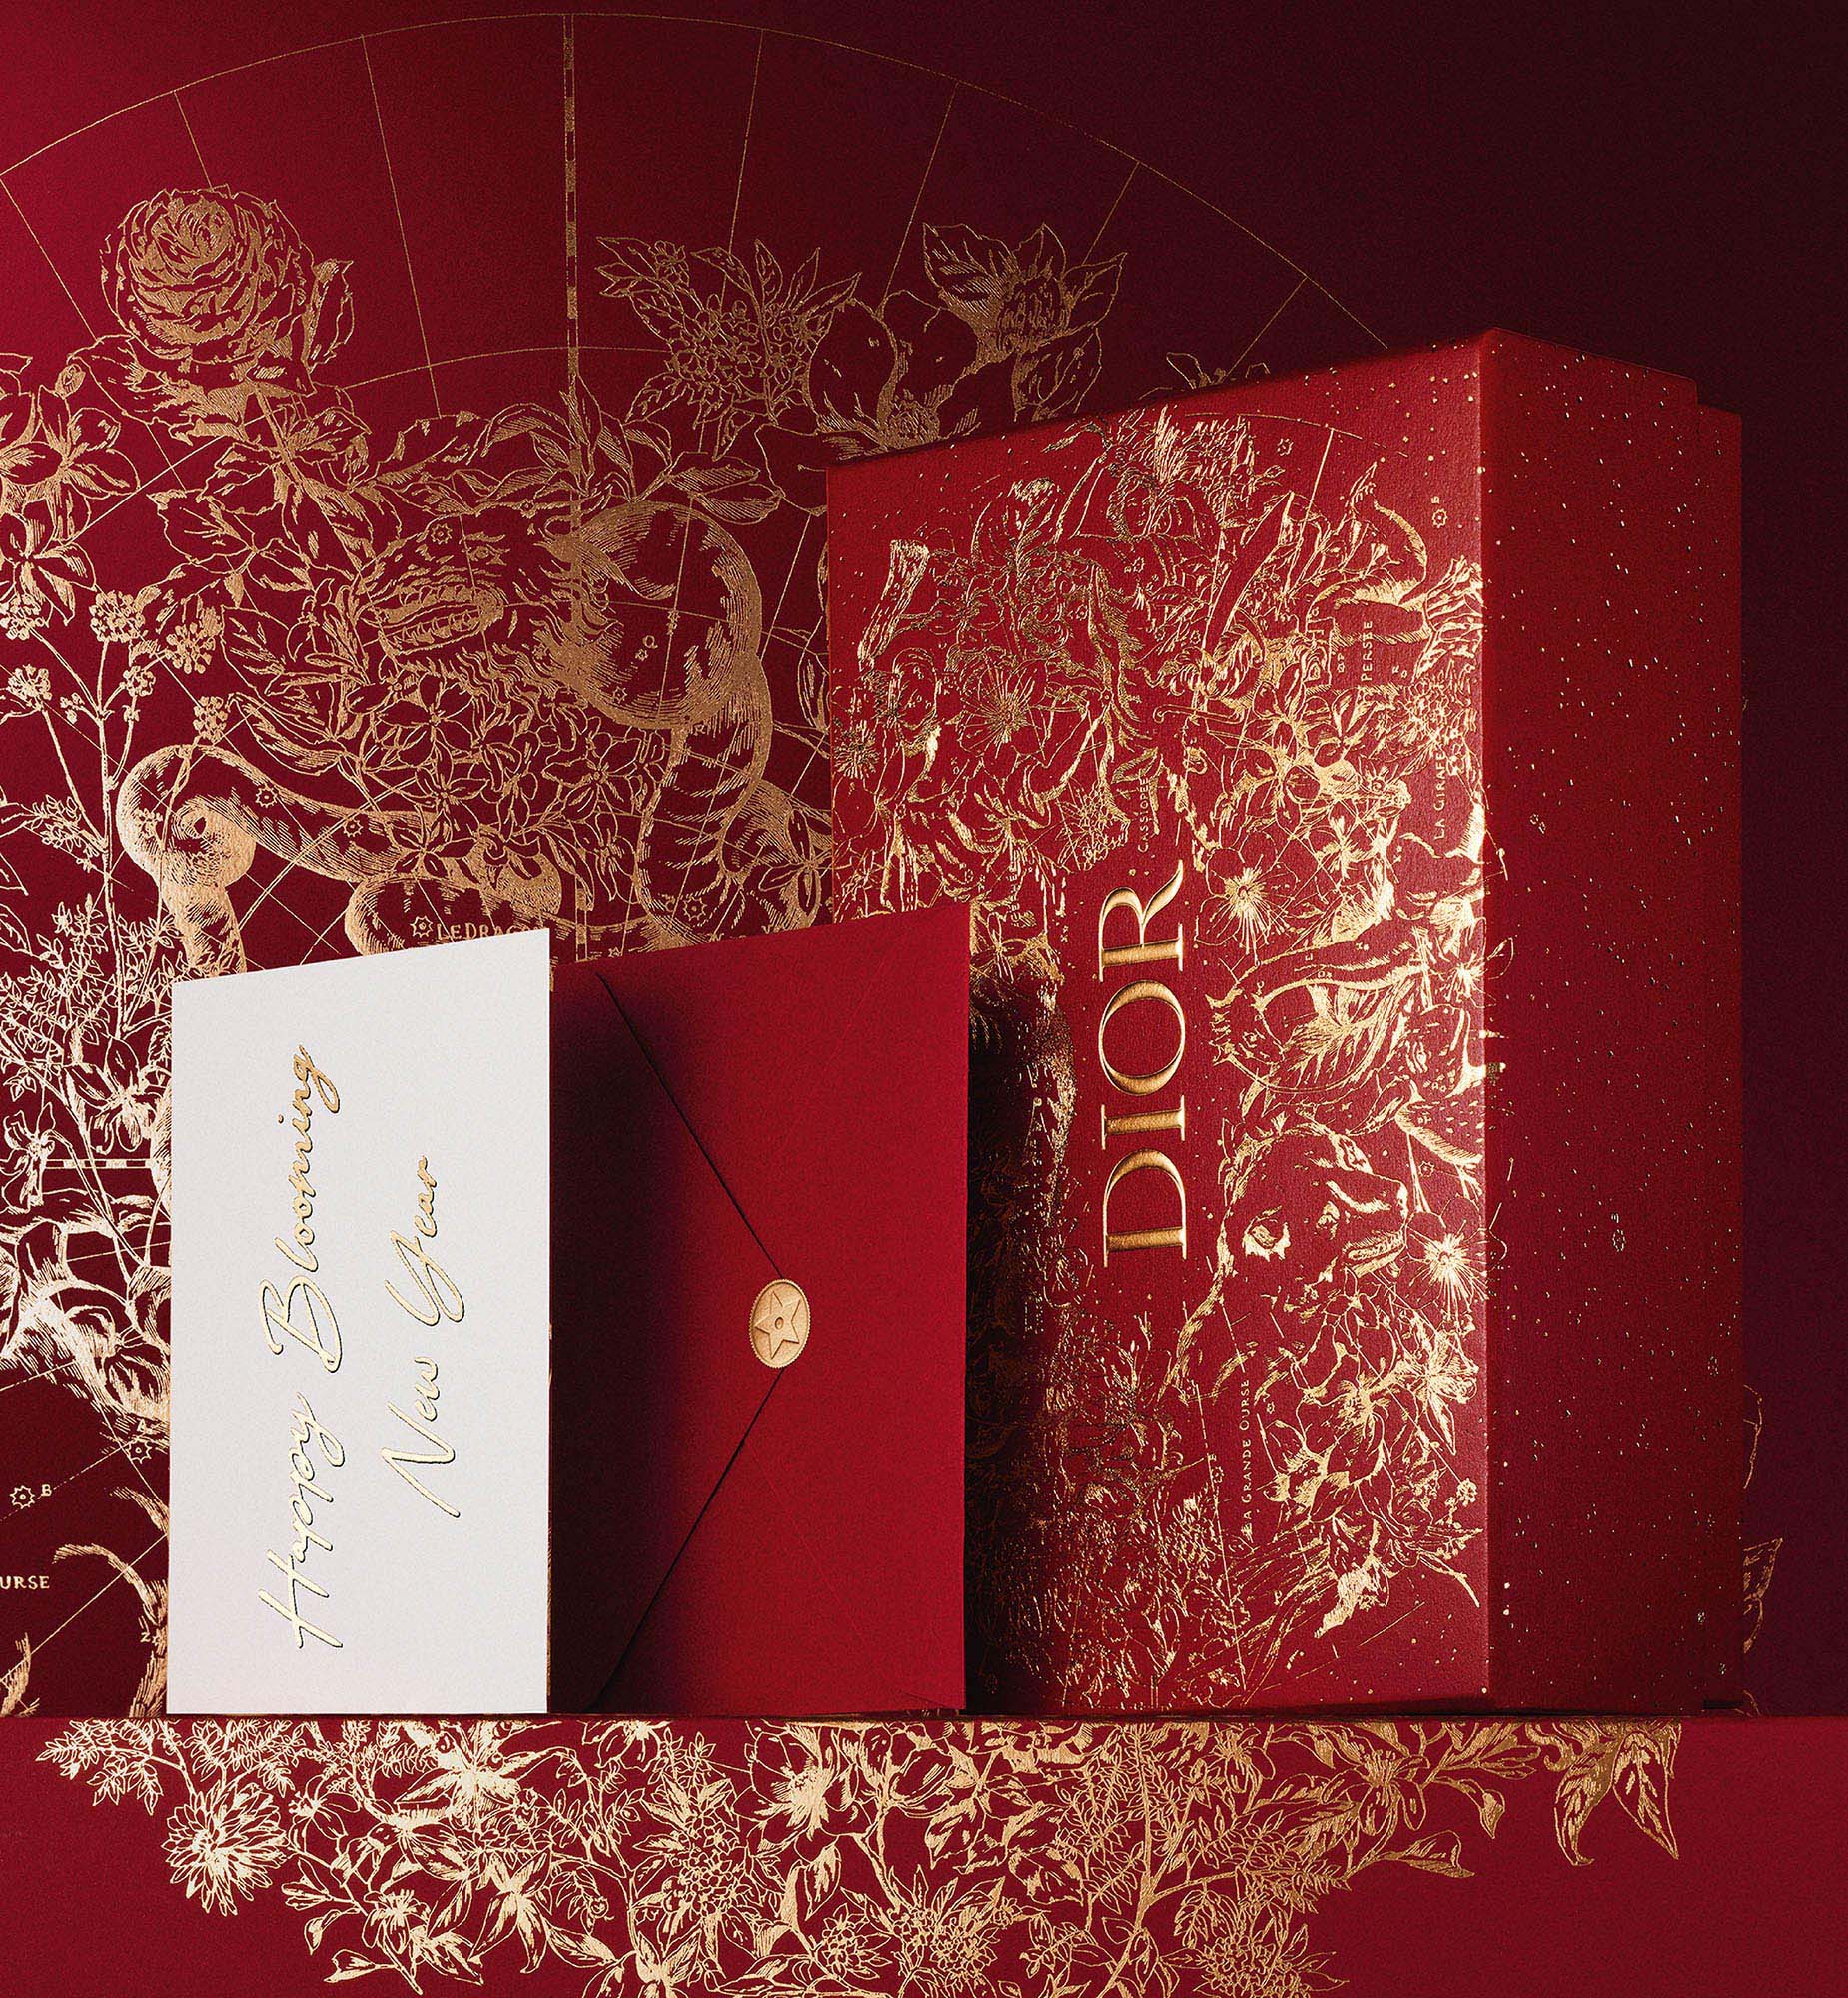 Dior - Chinese New Year 2021 3D Animations  Chinese new year gifts, Dior, Chinese  new year